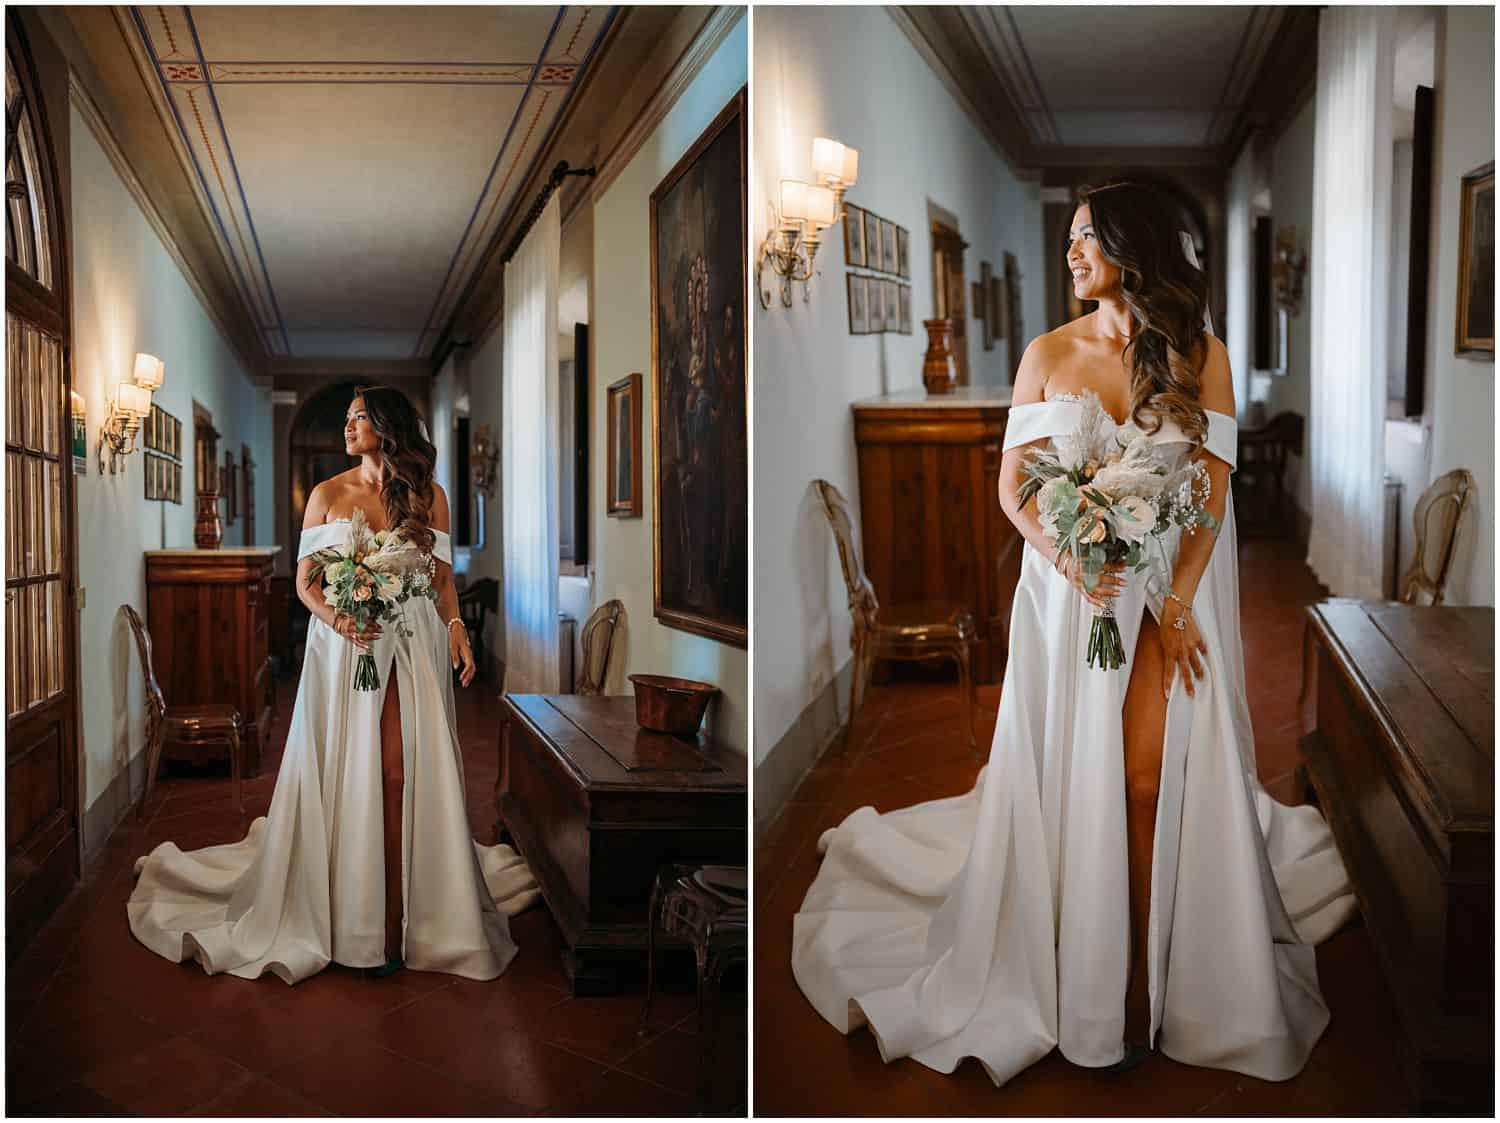 Bride ready for her wedding ceremony in Italy, image by the destination wedding photographers Ludovica & Valerio